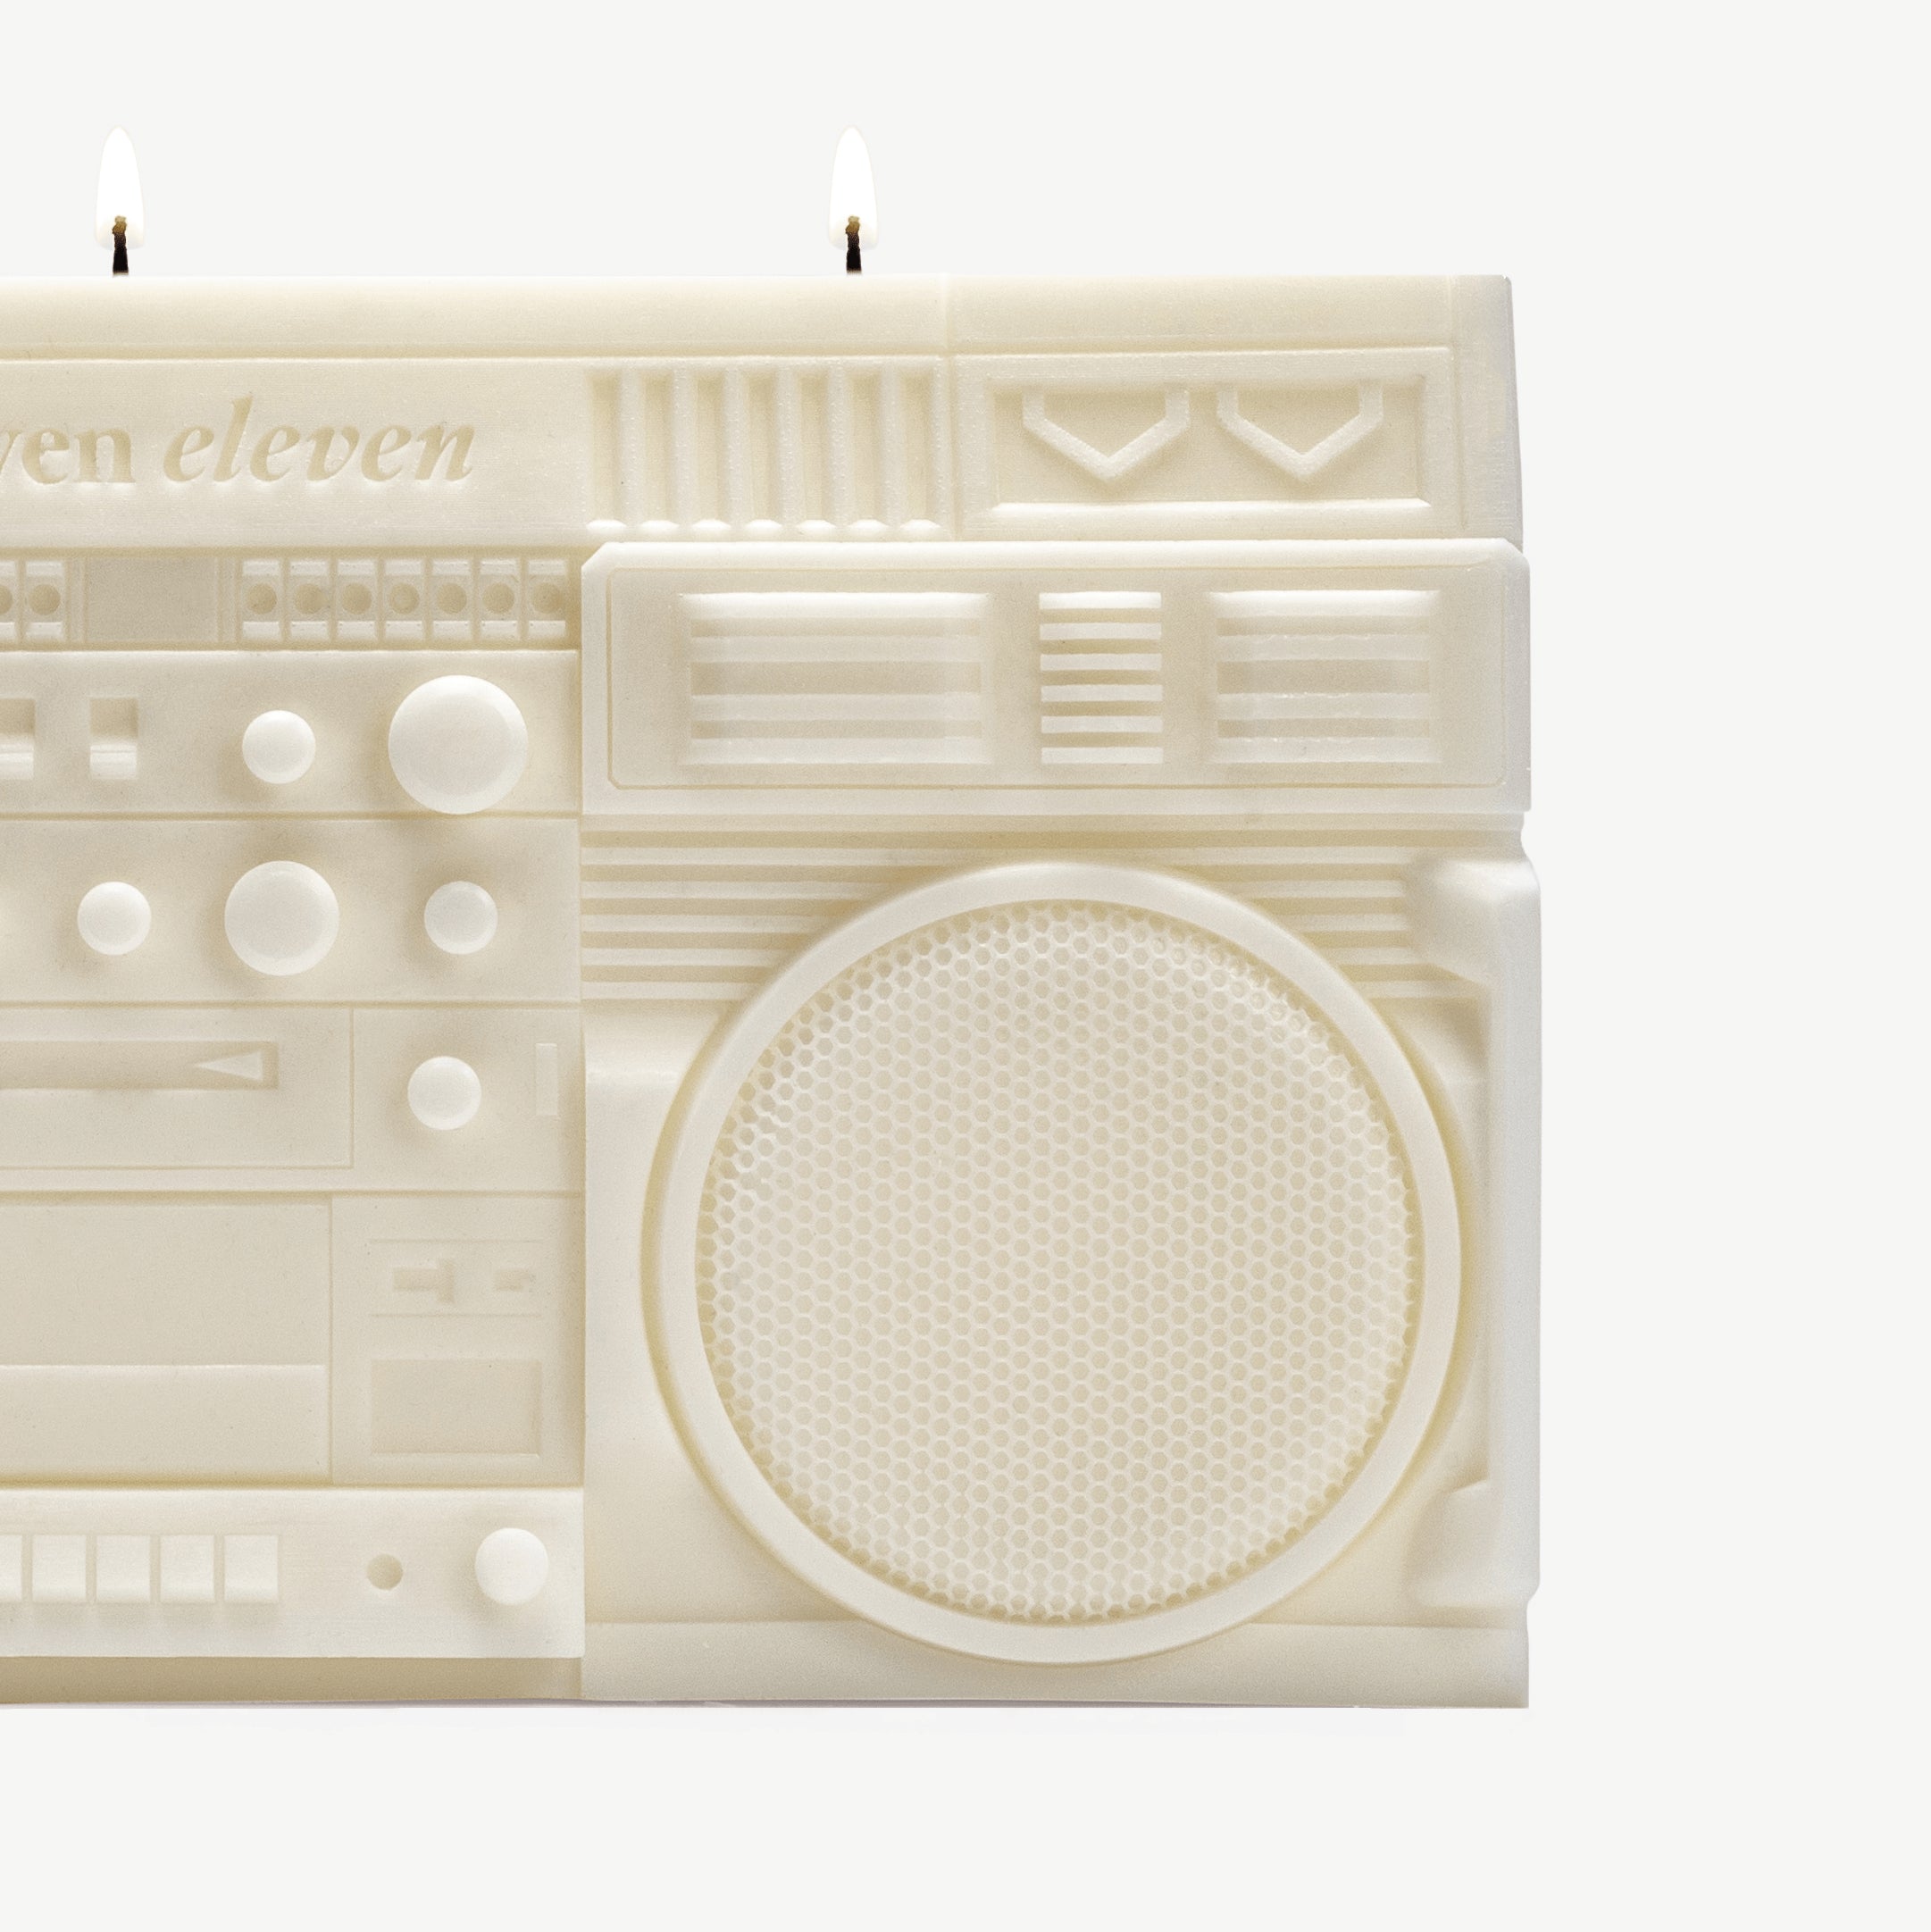 The Boombox Candle